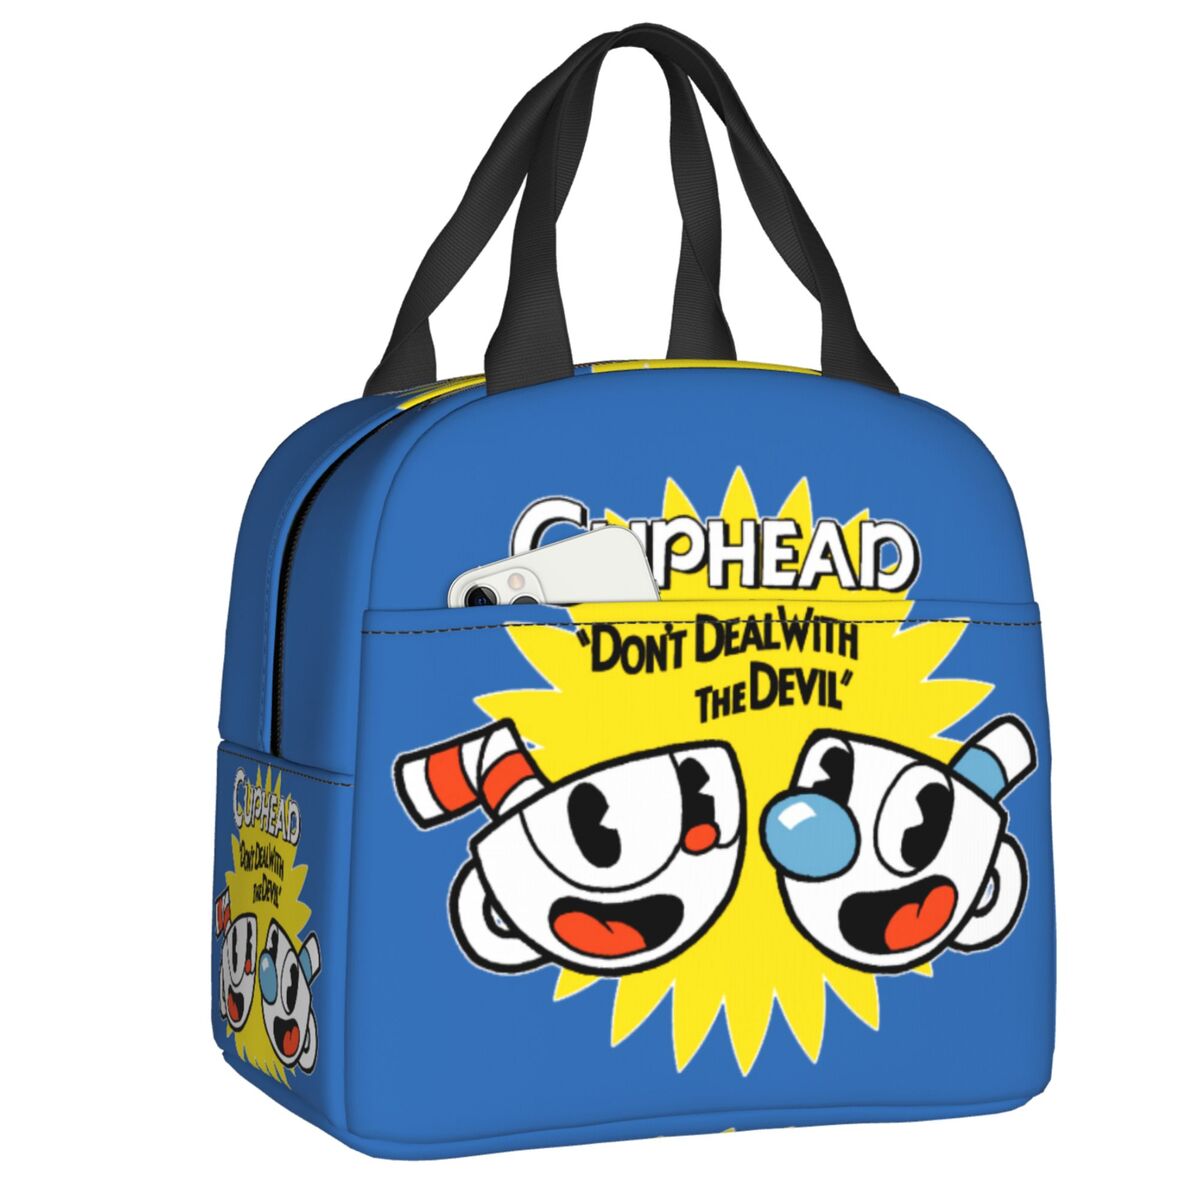 Hot Game Cuphead Mugman Lunch Bag for Women Portable Cooler Thermal Food Insulated Lunch Box Work - Cuphead Plush